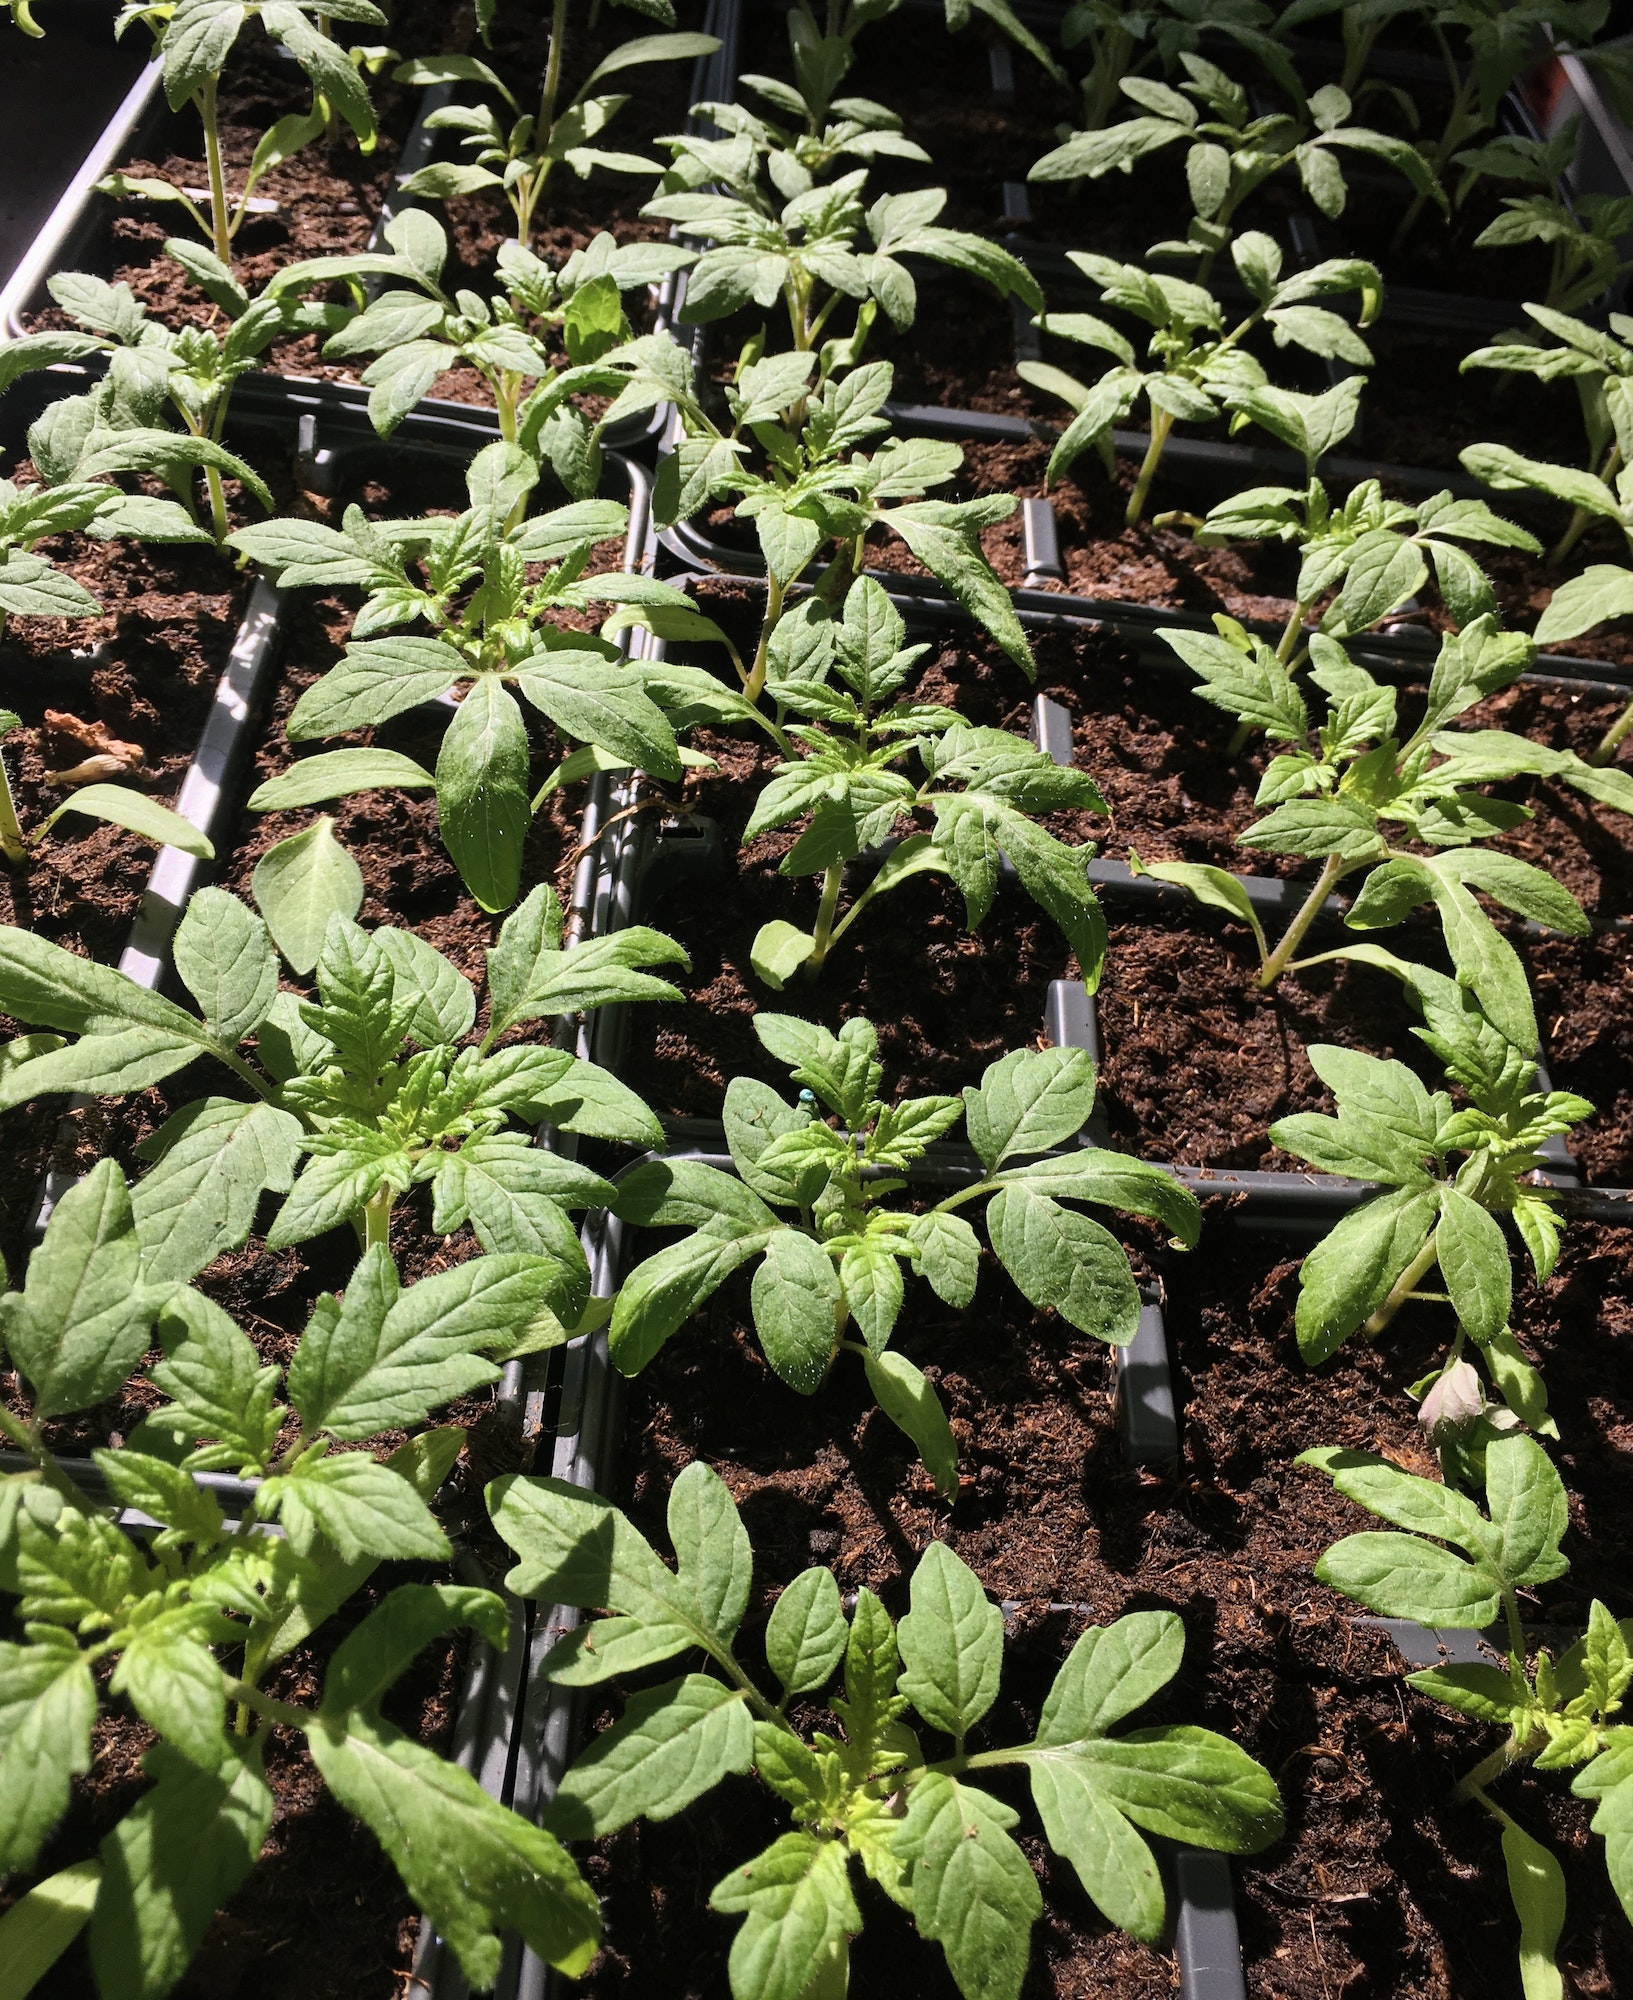 Seedlings of tomatoes in containers for planting